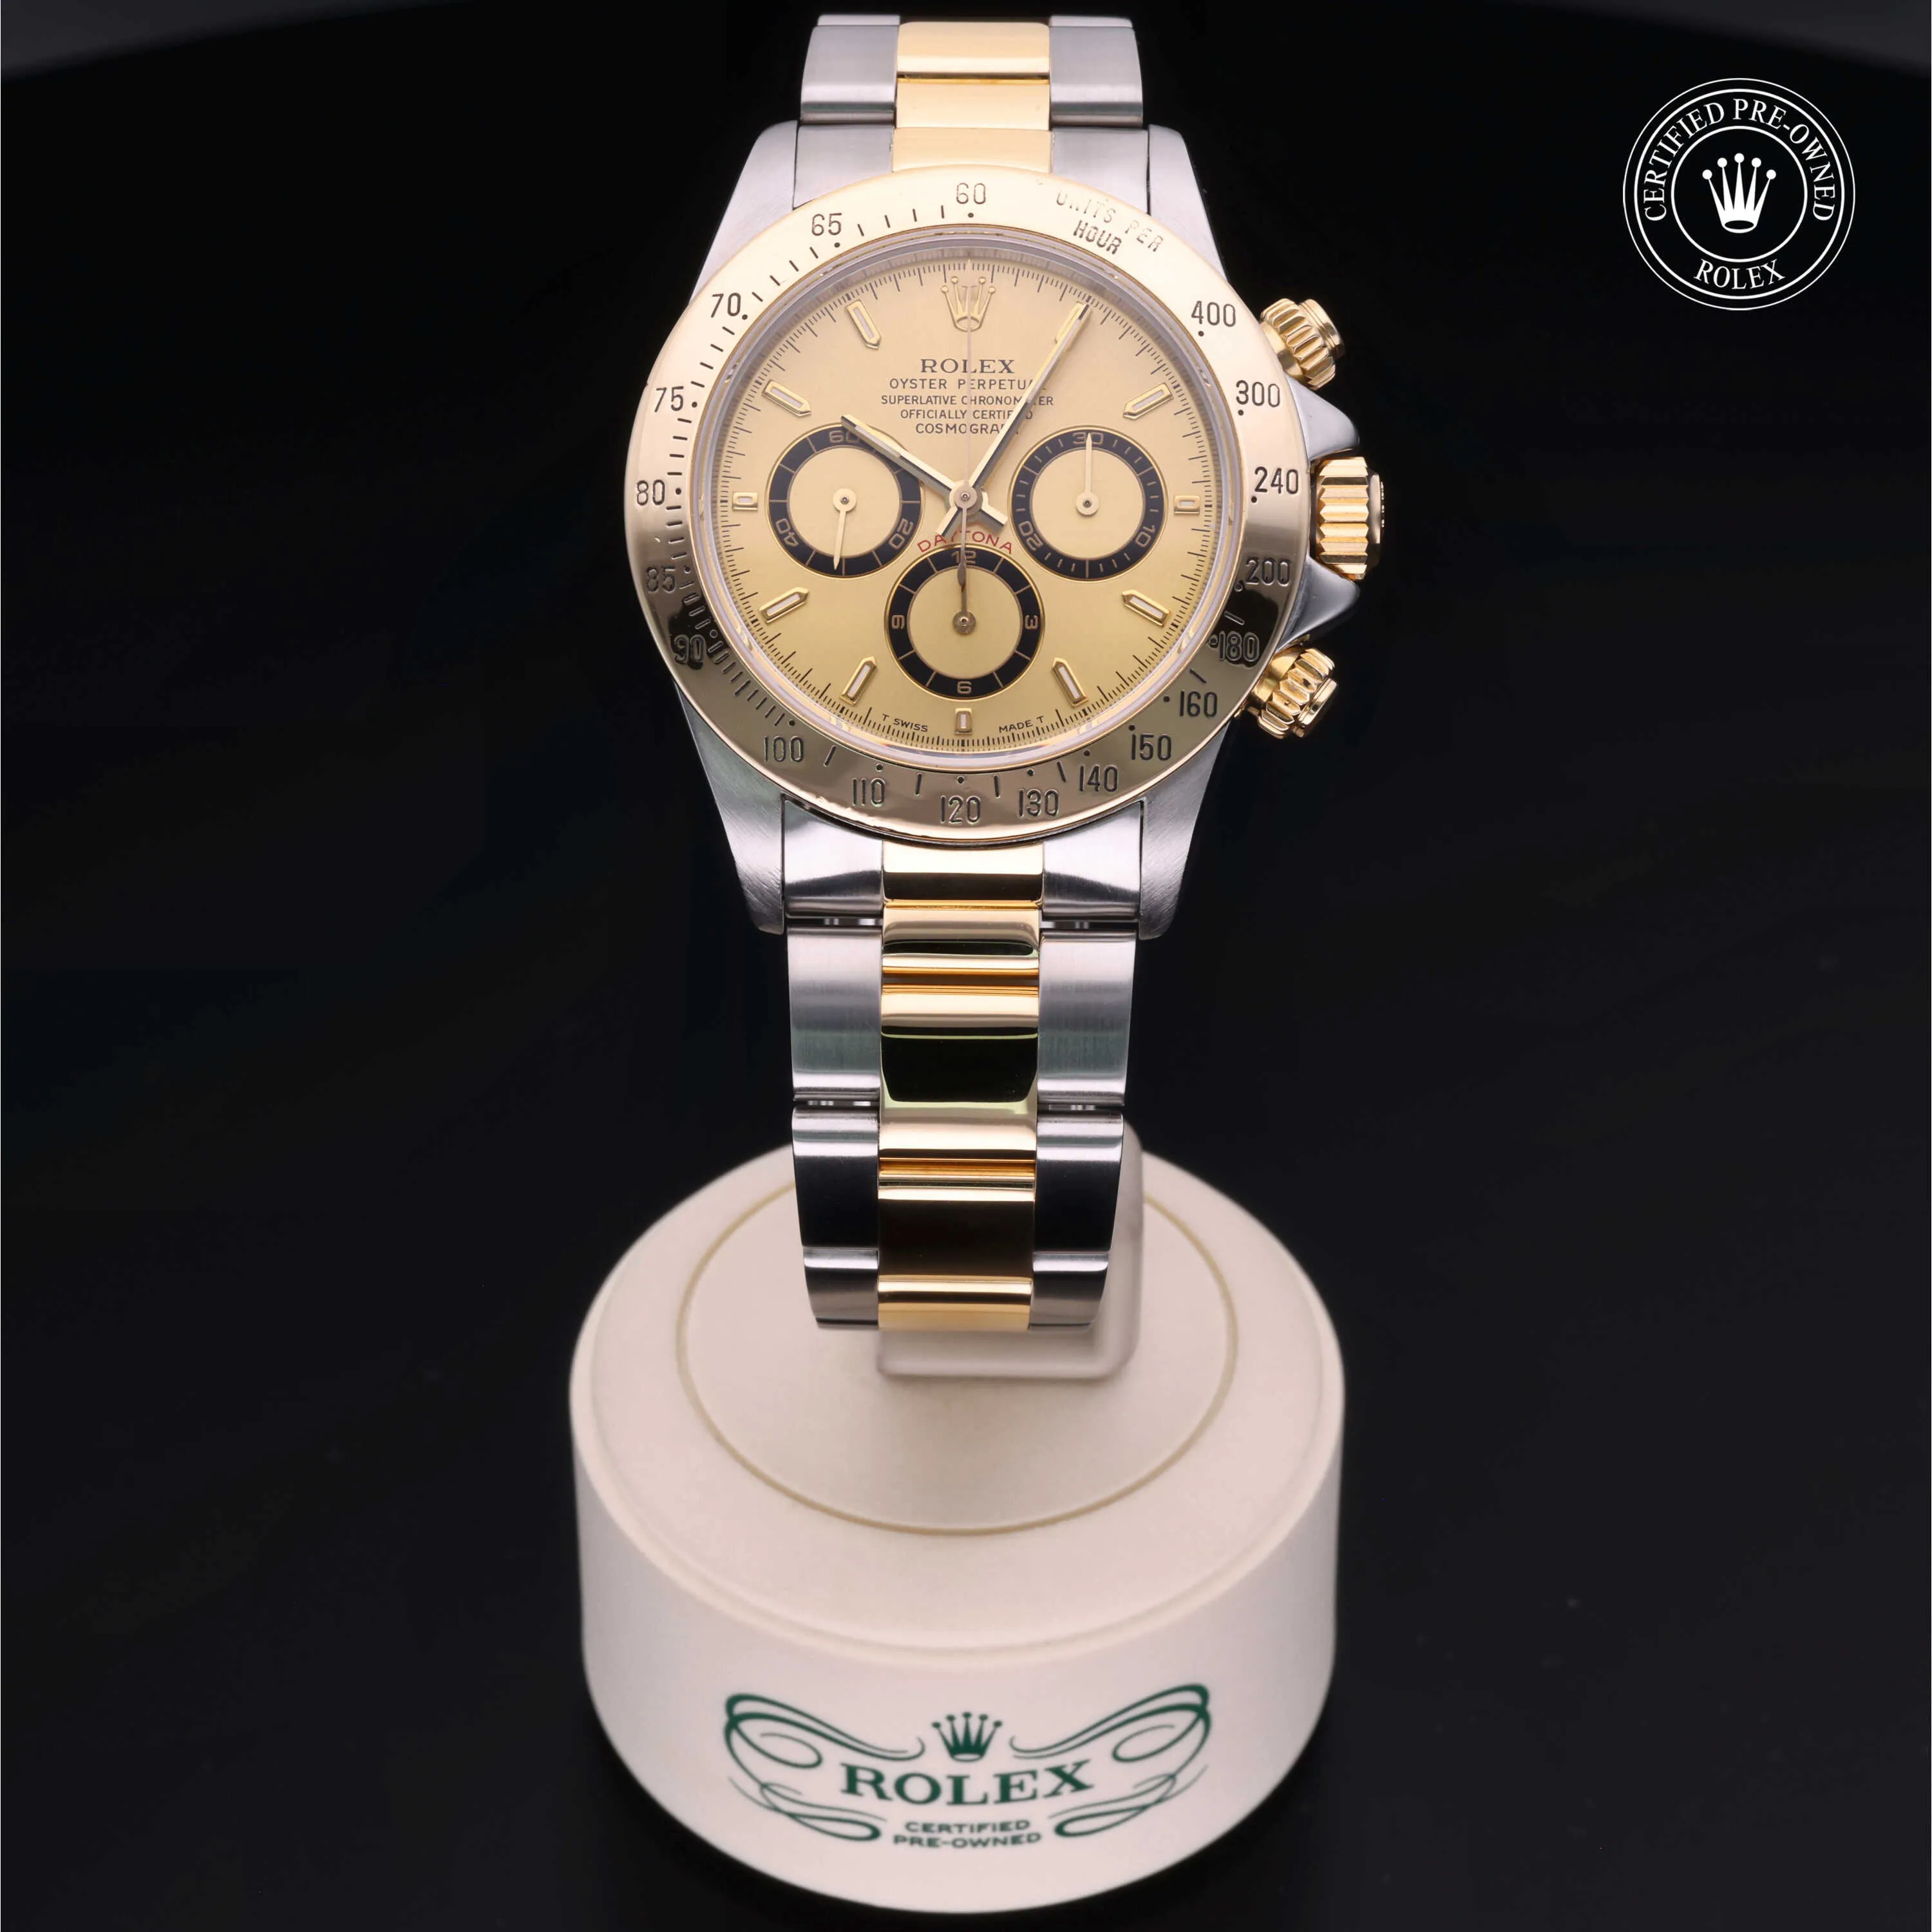 Rolex Daytona 16523 40mm Yellow gold and stainless steel Champagne 3